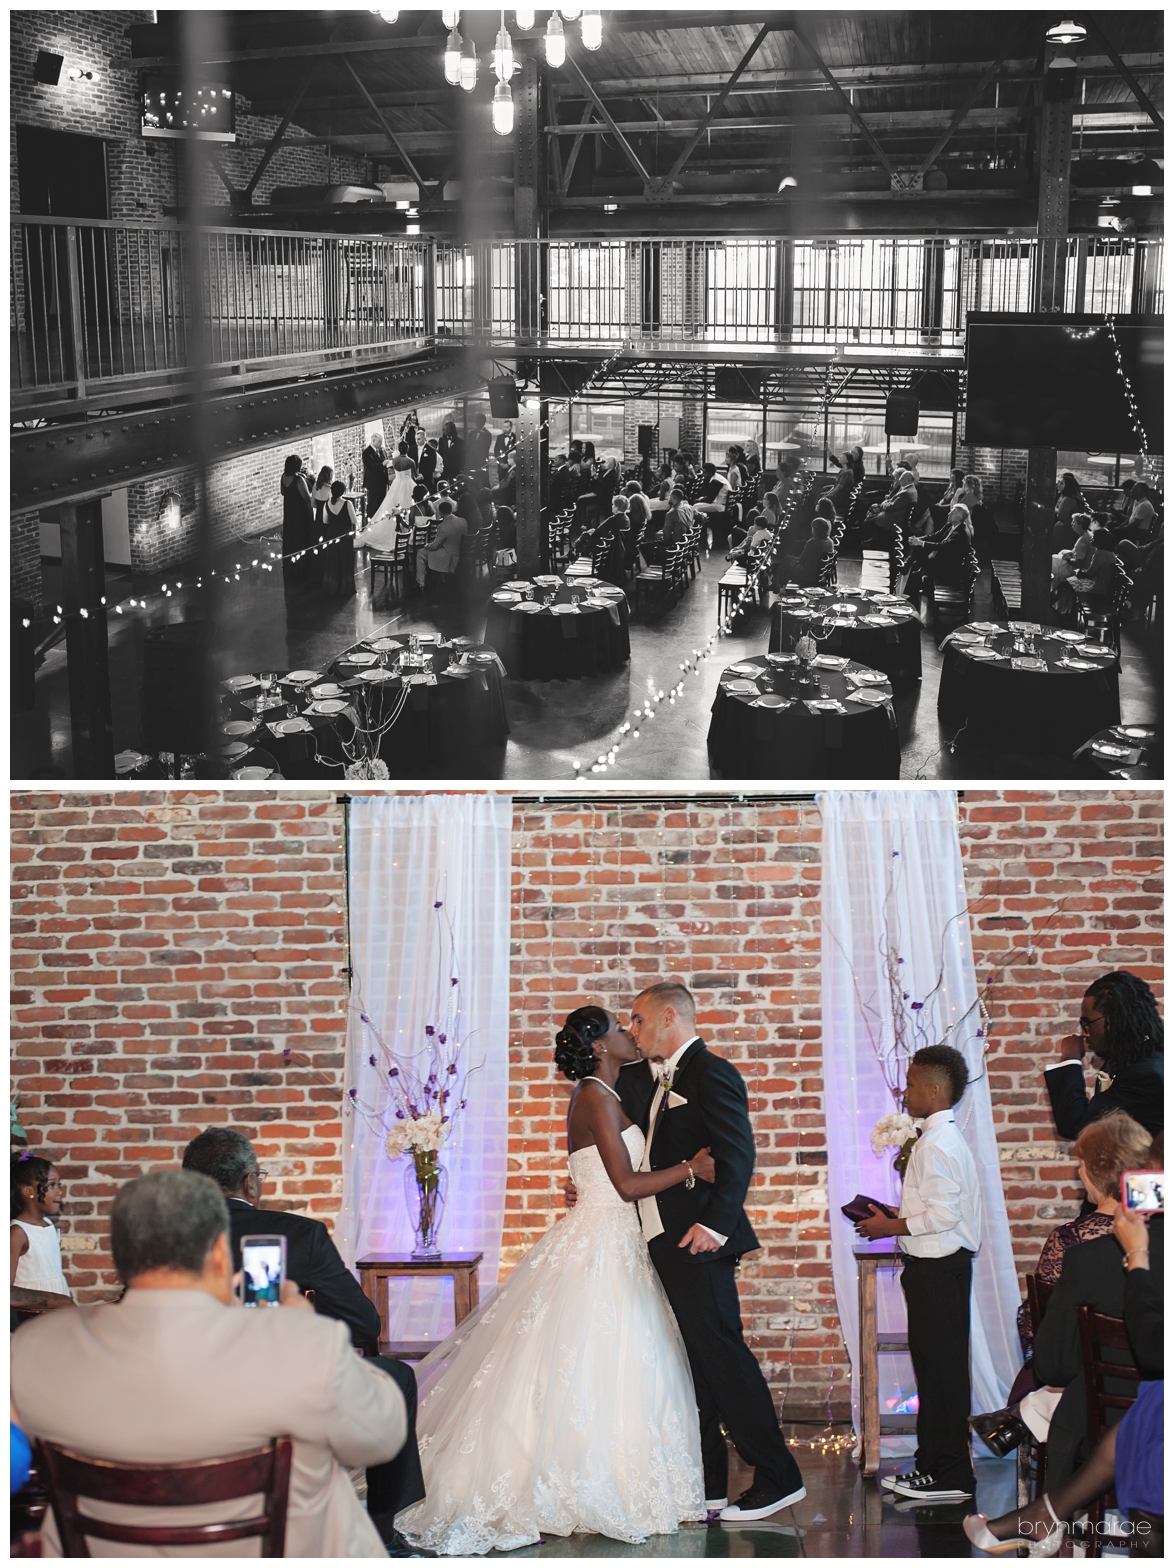 a-l-mile-high-station-wedding-photography-451-edit